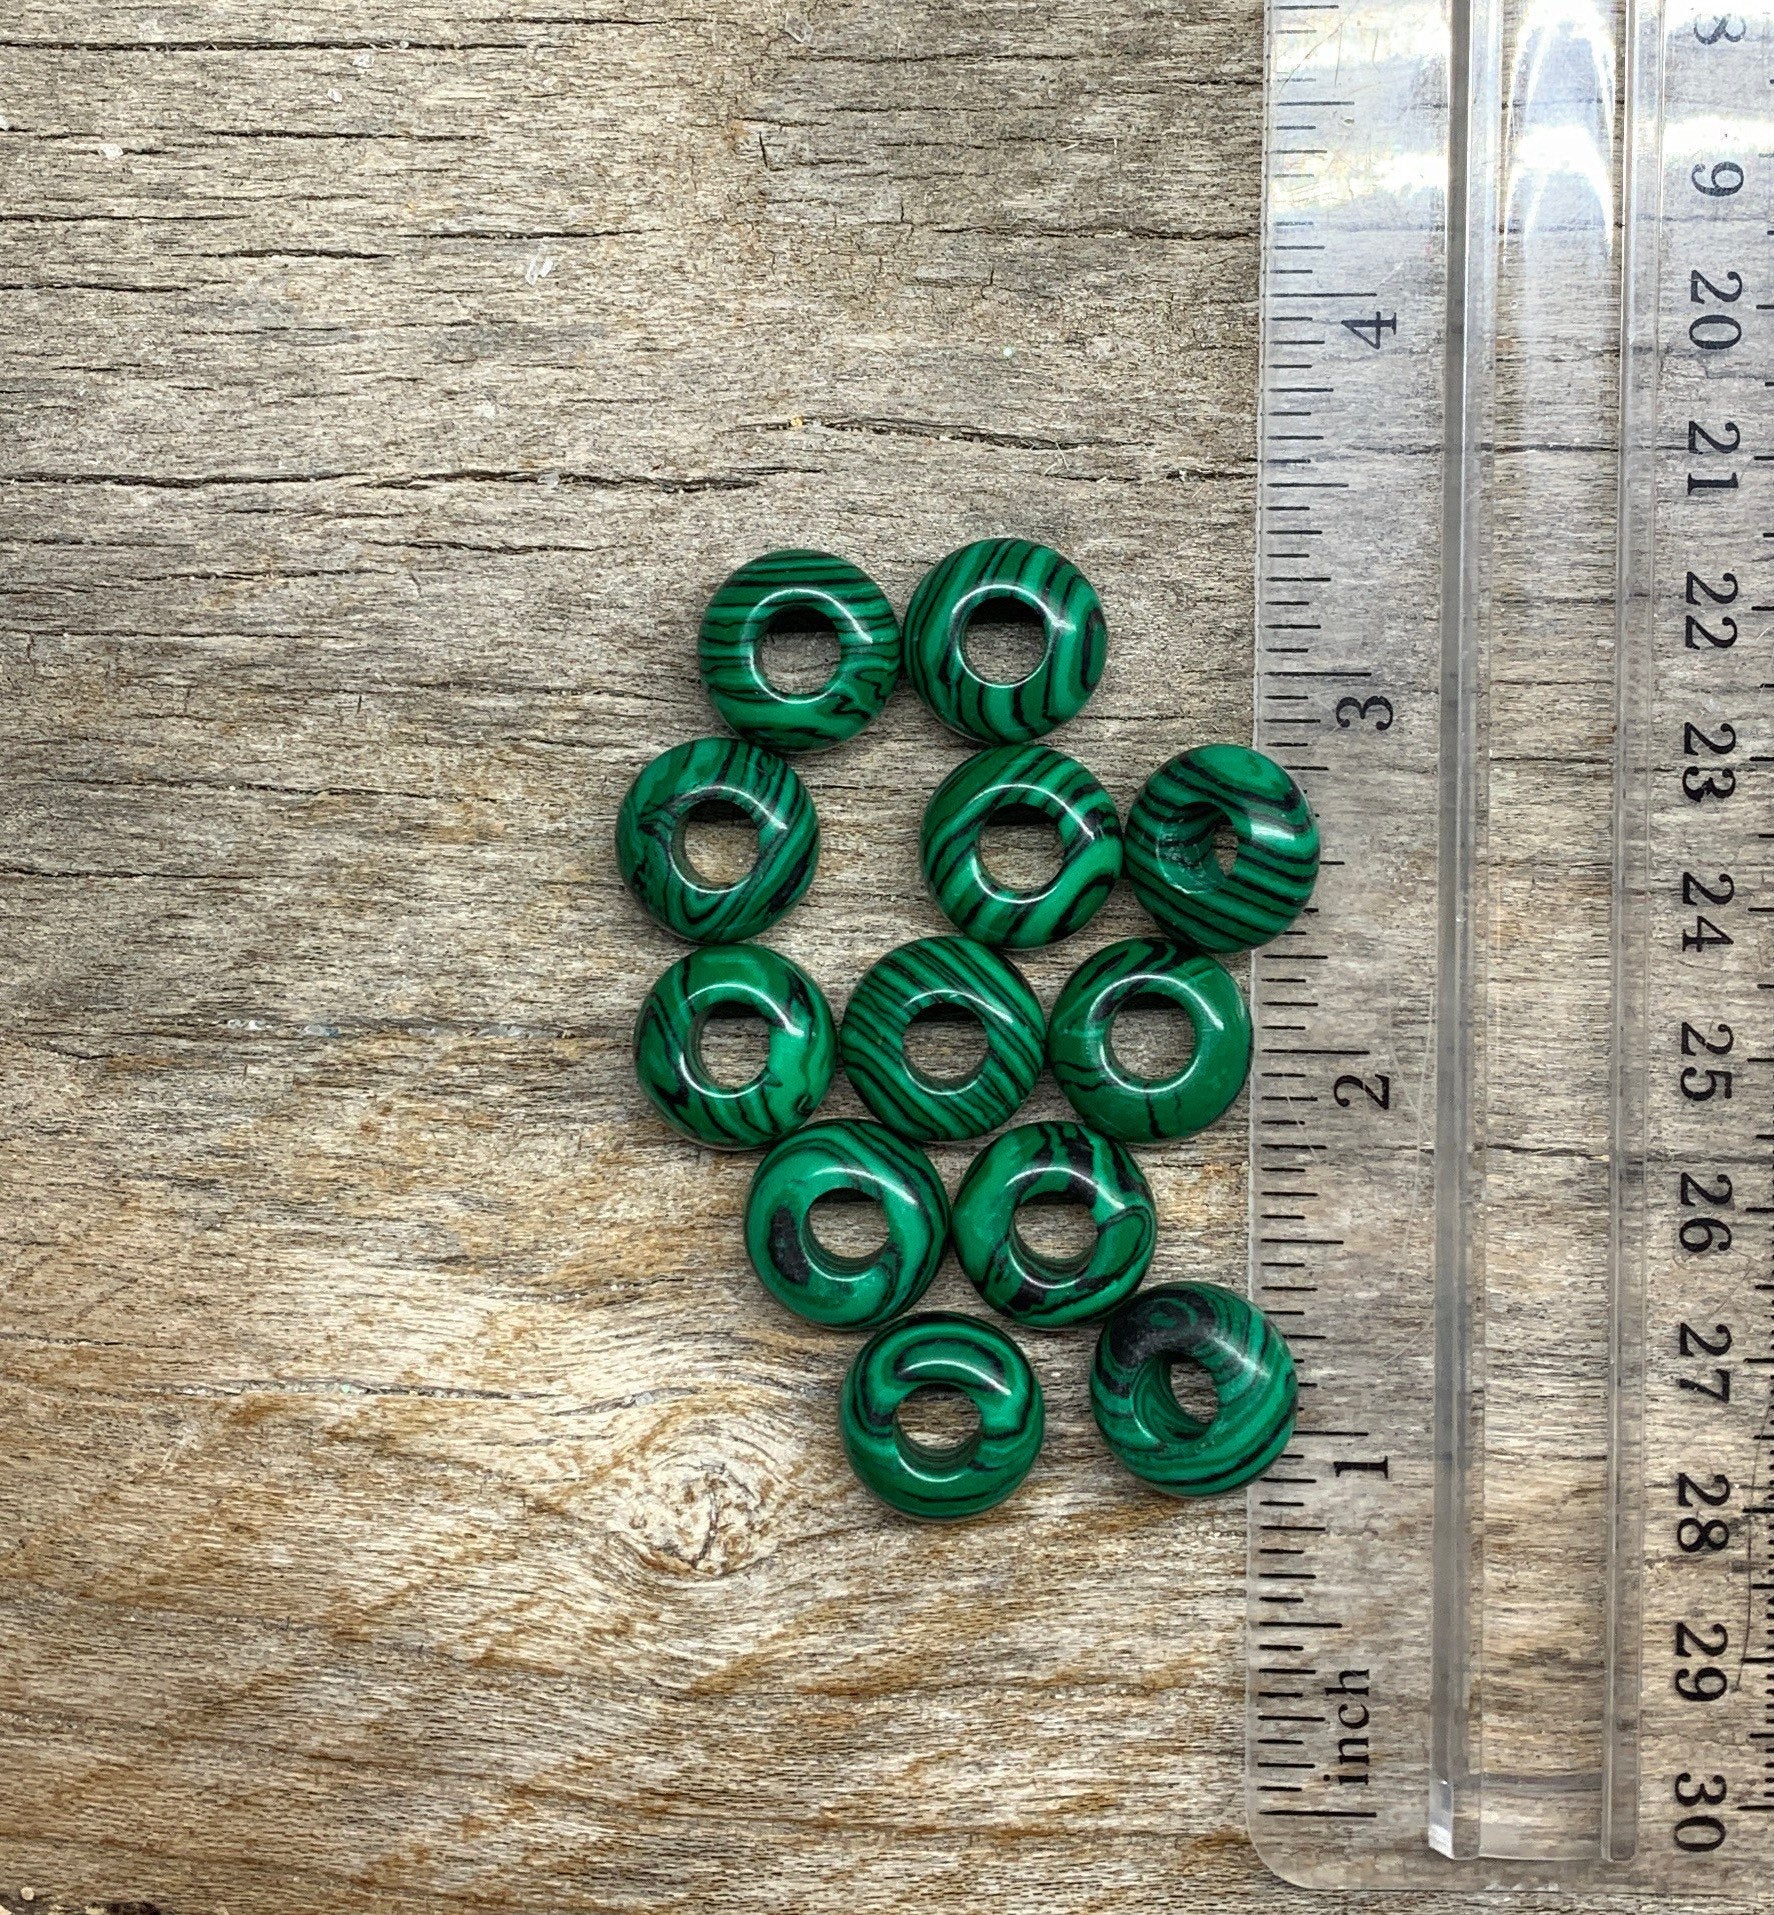 "Close-up of vibrant green malachite beads with unique striated patterns, creating an eye-catching accessory, positioned next to a ruler.